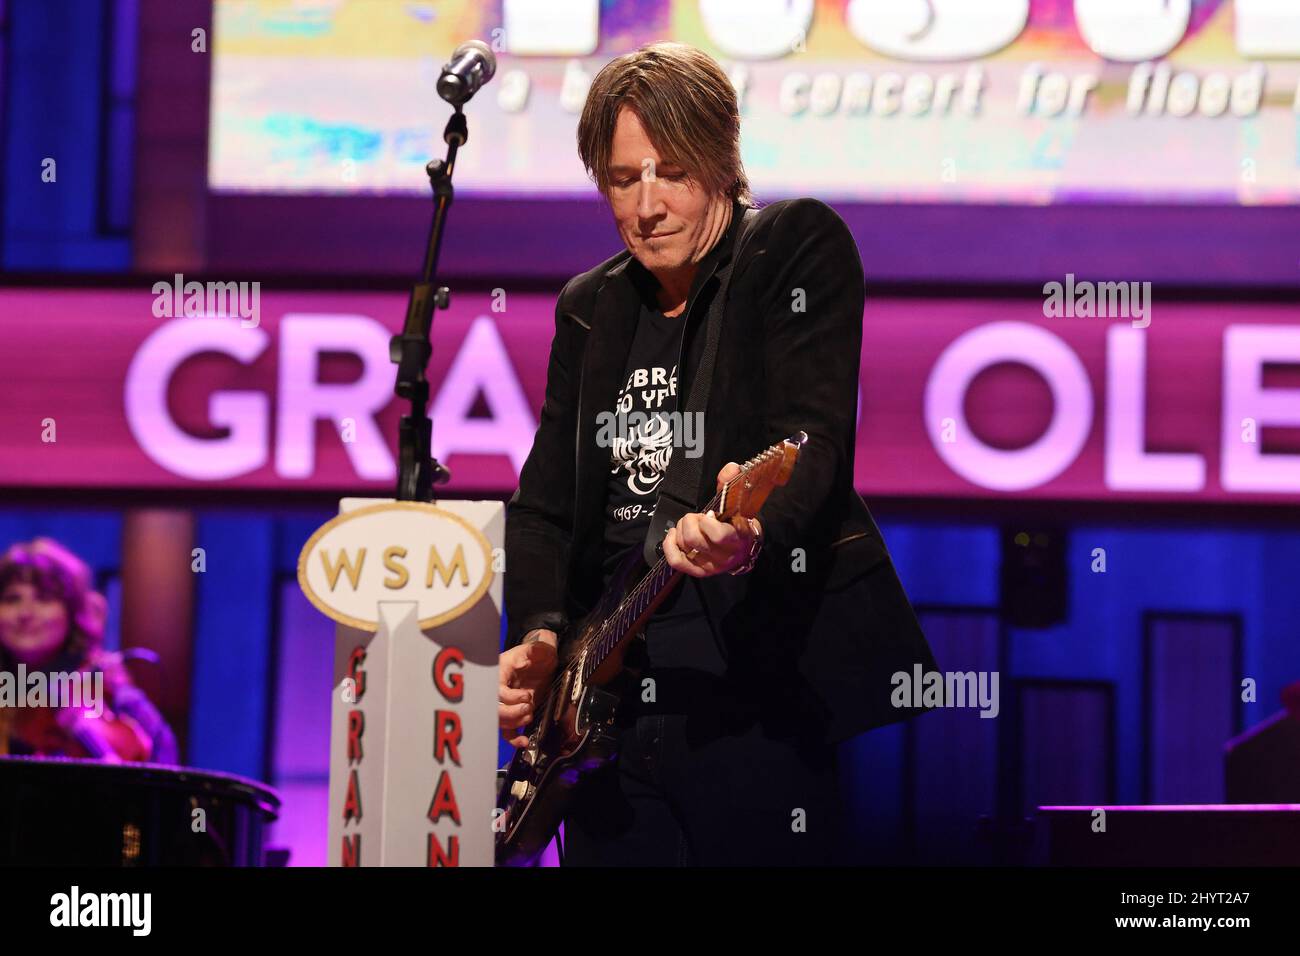 Keith Urban performing onstage at Loretta Lynn's Friends: Hometown Rising benefit concert with proceeds benefiting the United Way of Humphreys County on September 13, 2021 in Nashville, TN. Stock Photo